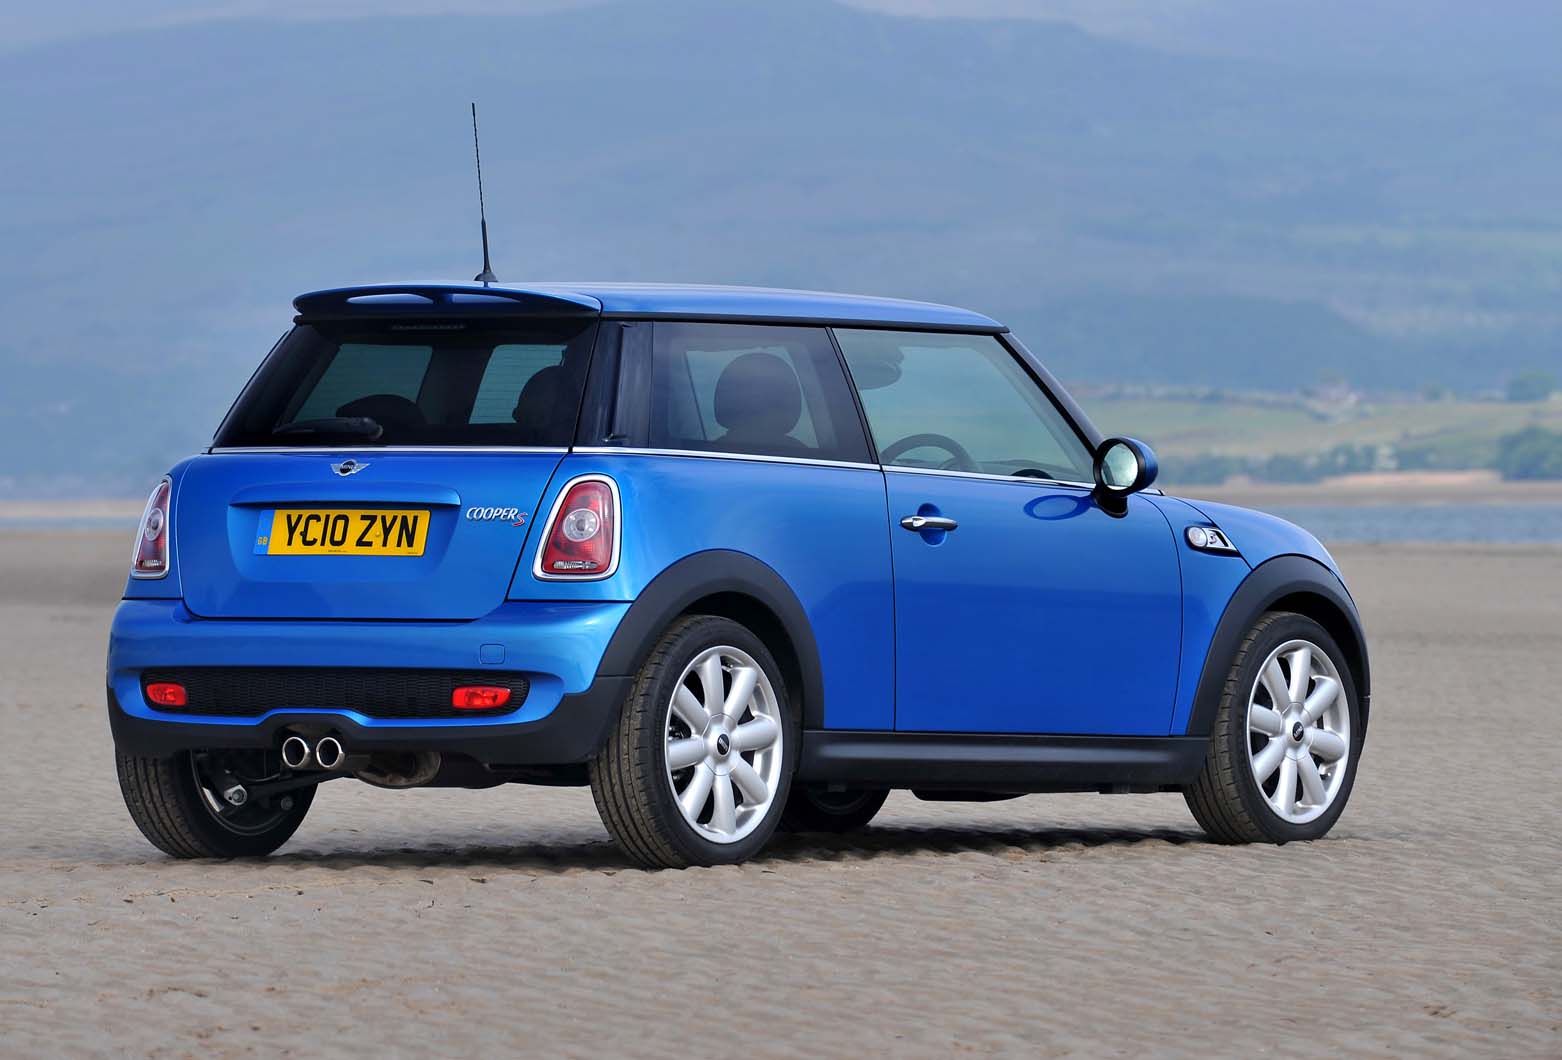 Used car buying guide: Mini Cooper S